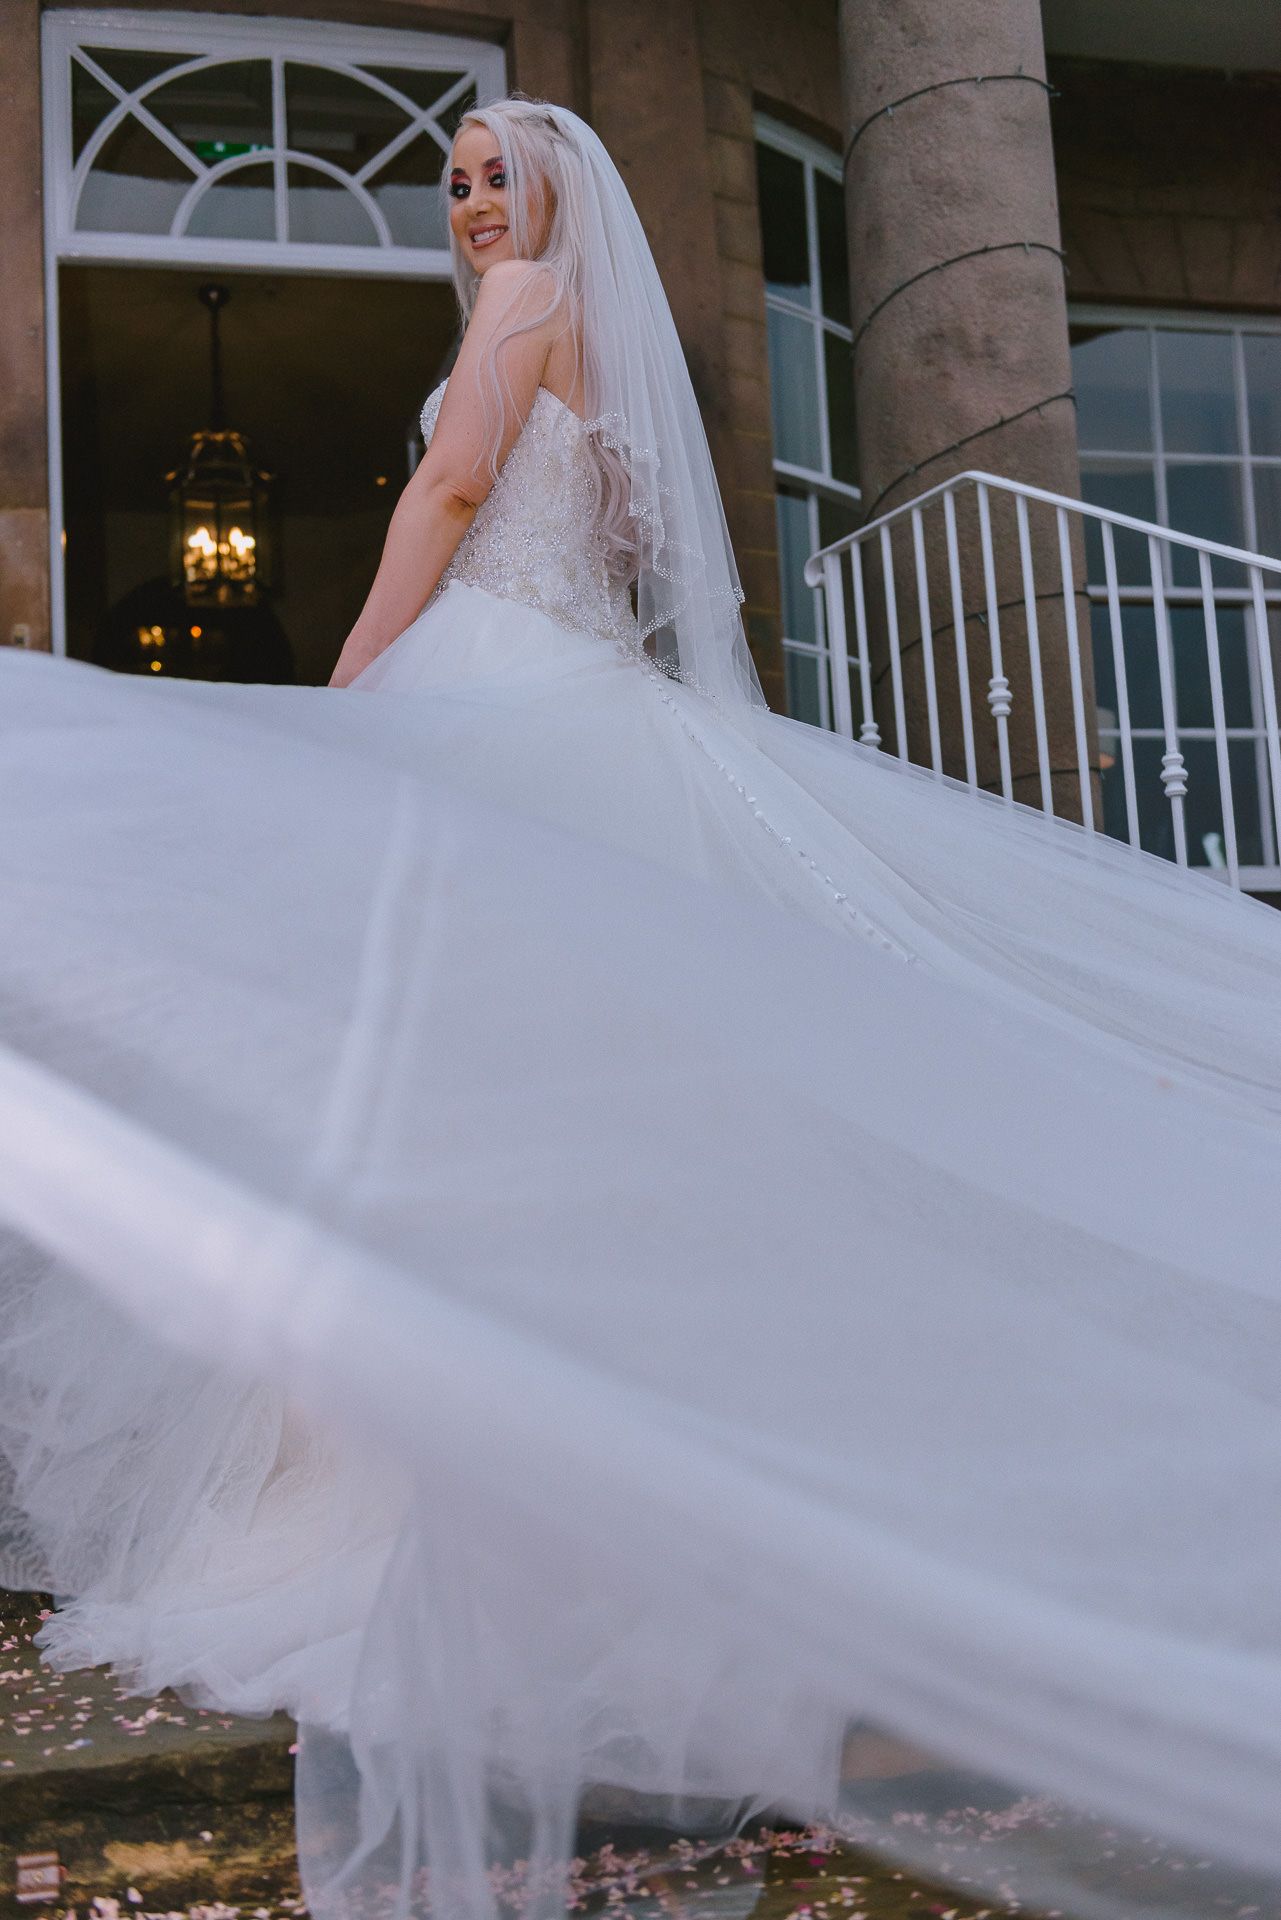 the bride turns to face the camera as she twirls her dress on the venue steps